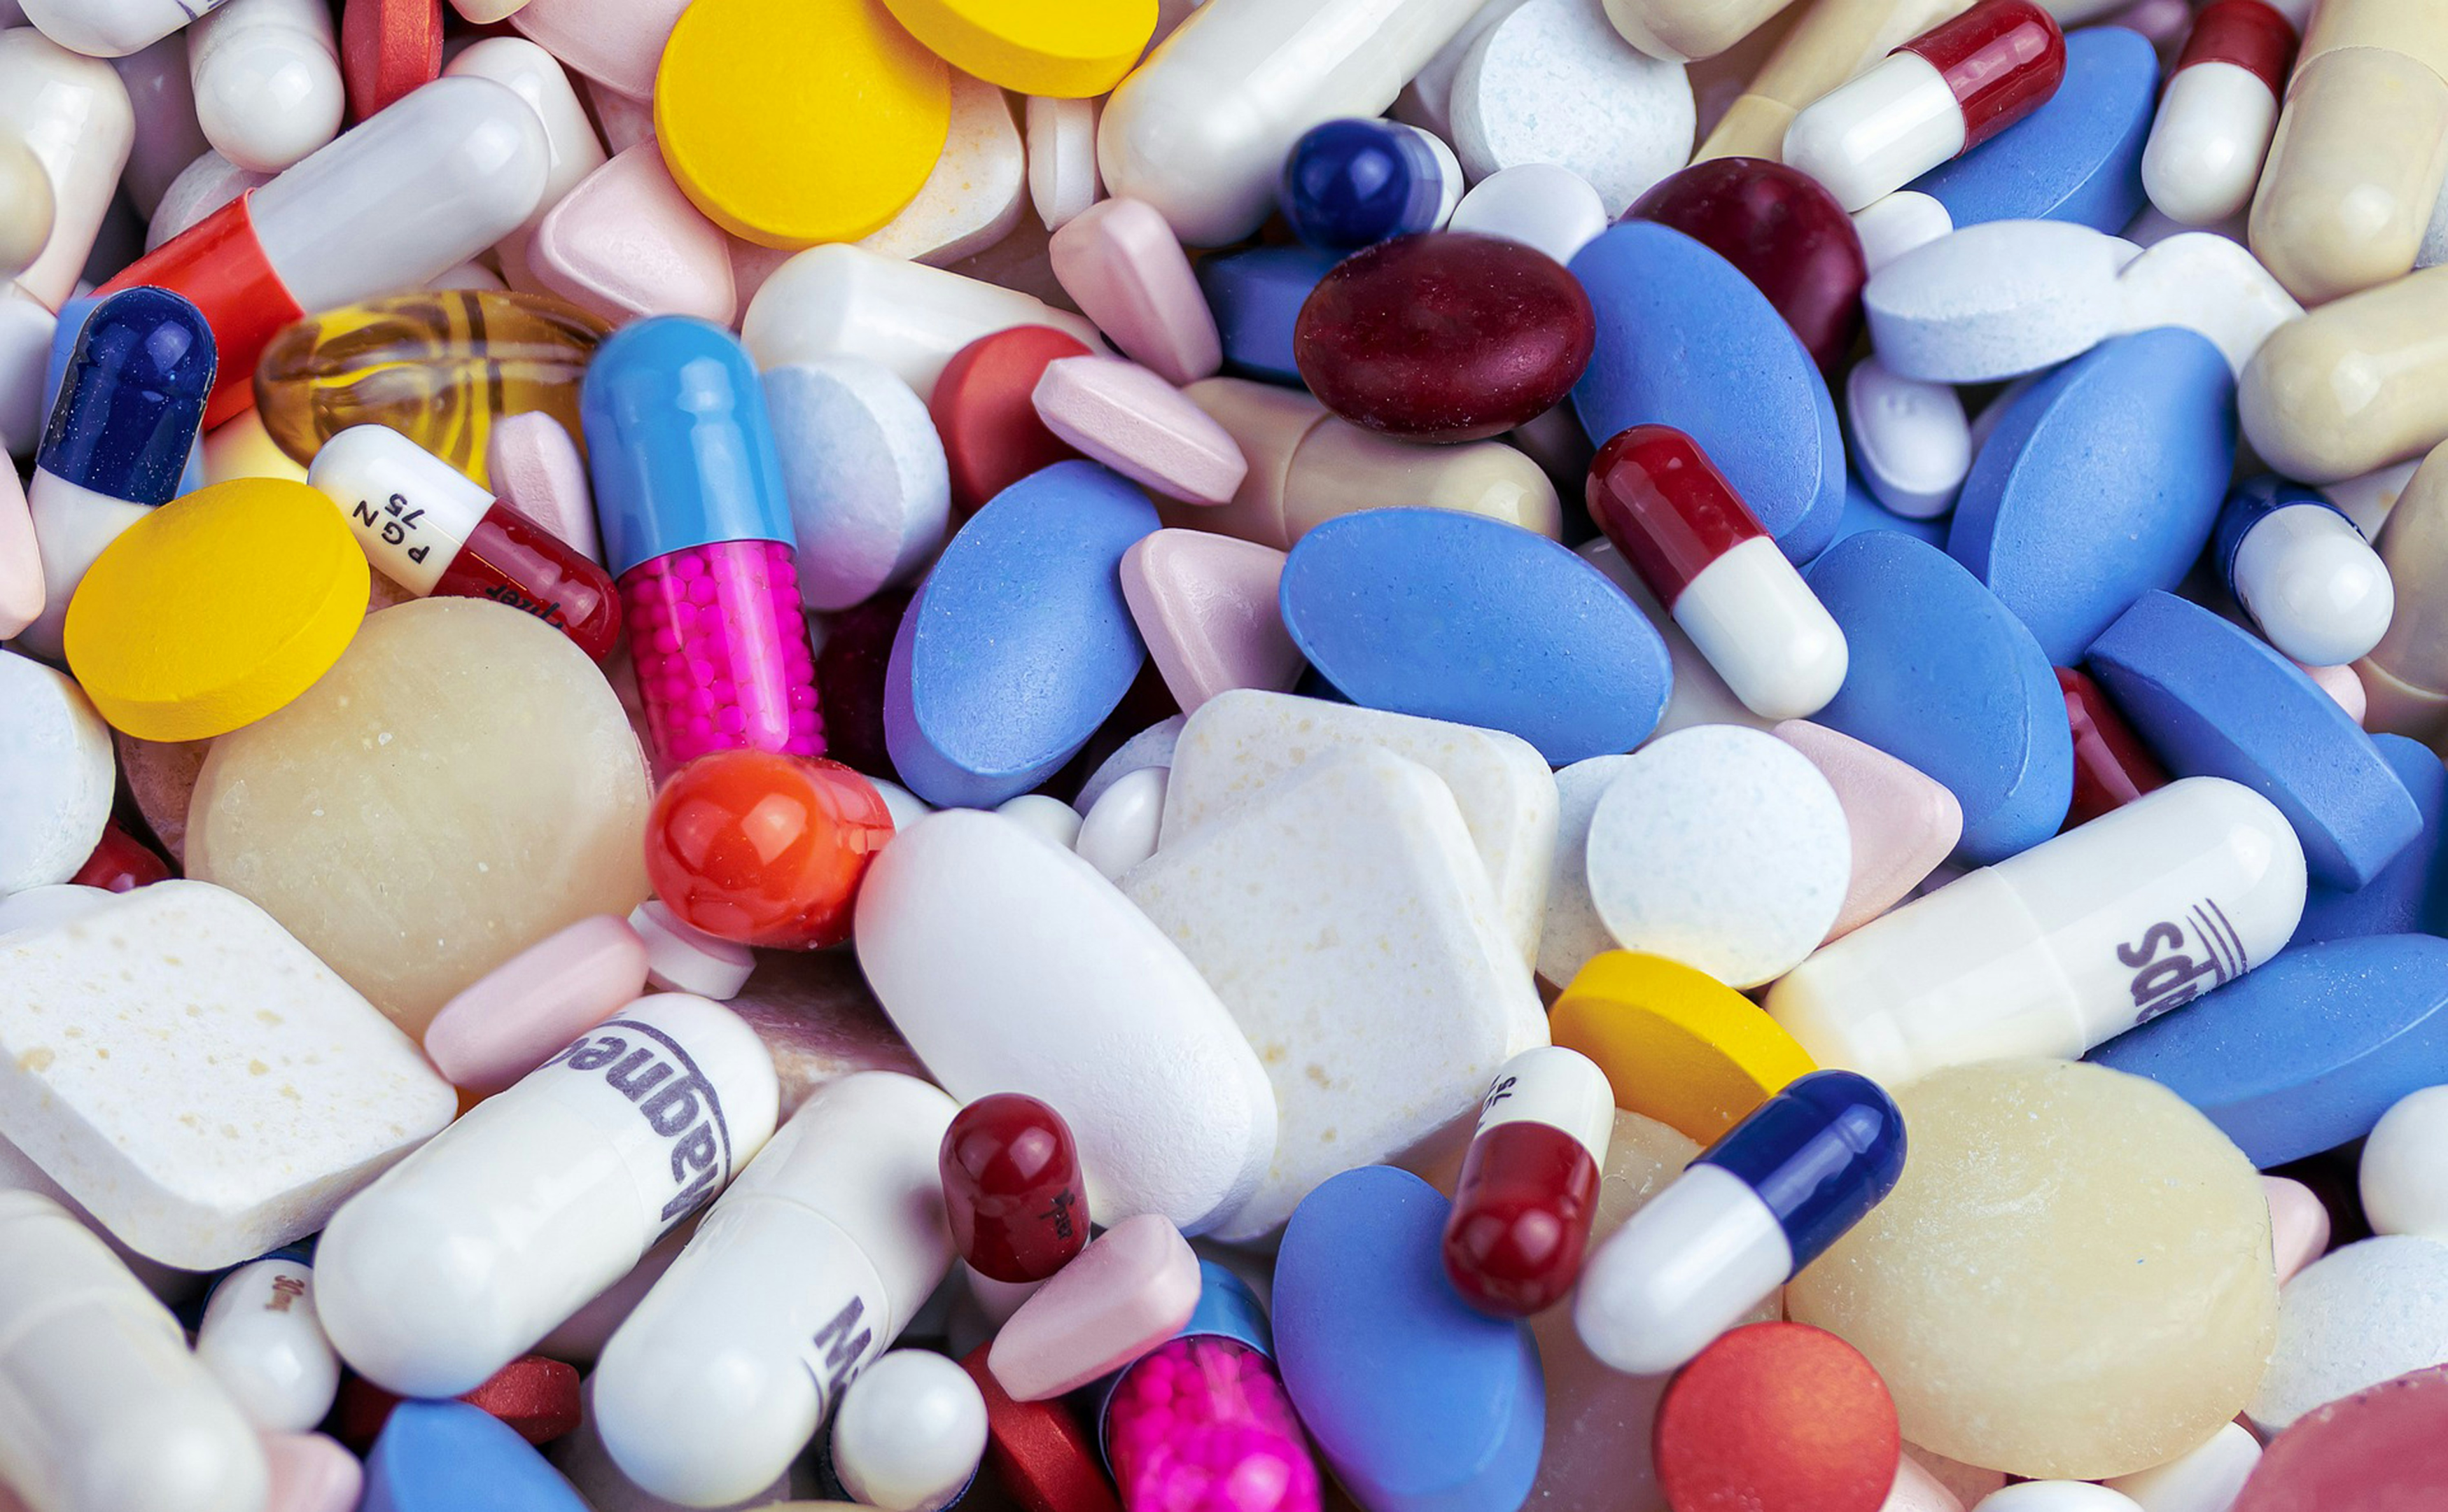 Prescription medications can lead to criminal charges when used improperly.